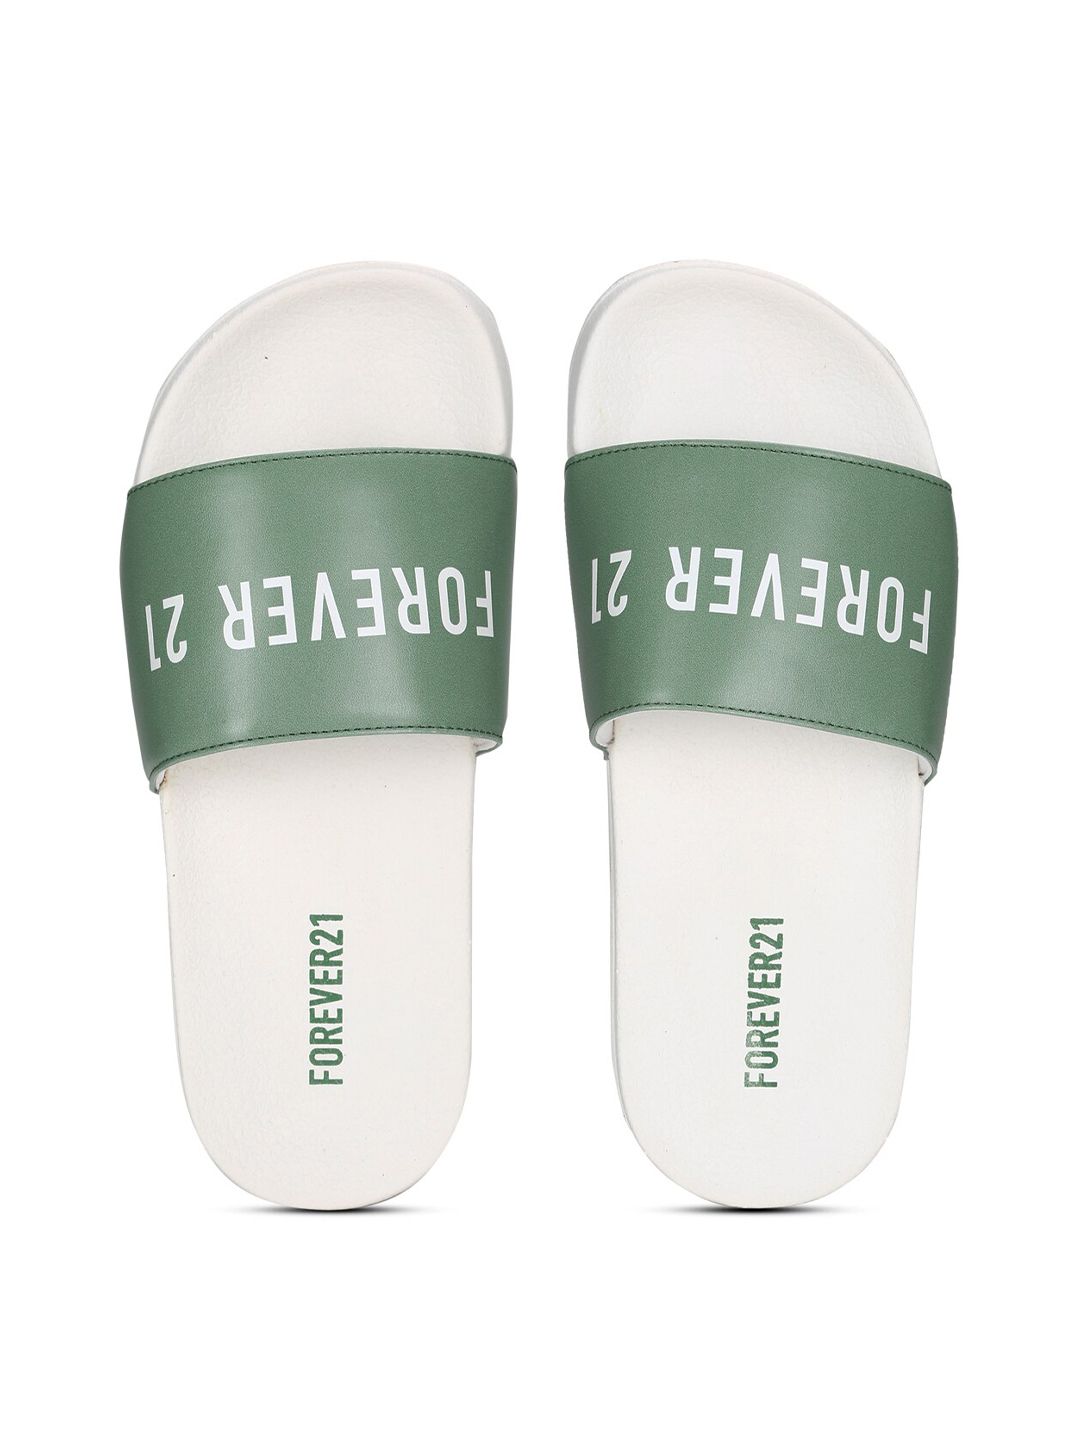 FOREVER 21 Women White & Green Printed Sliders Price in India